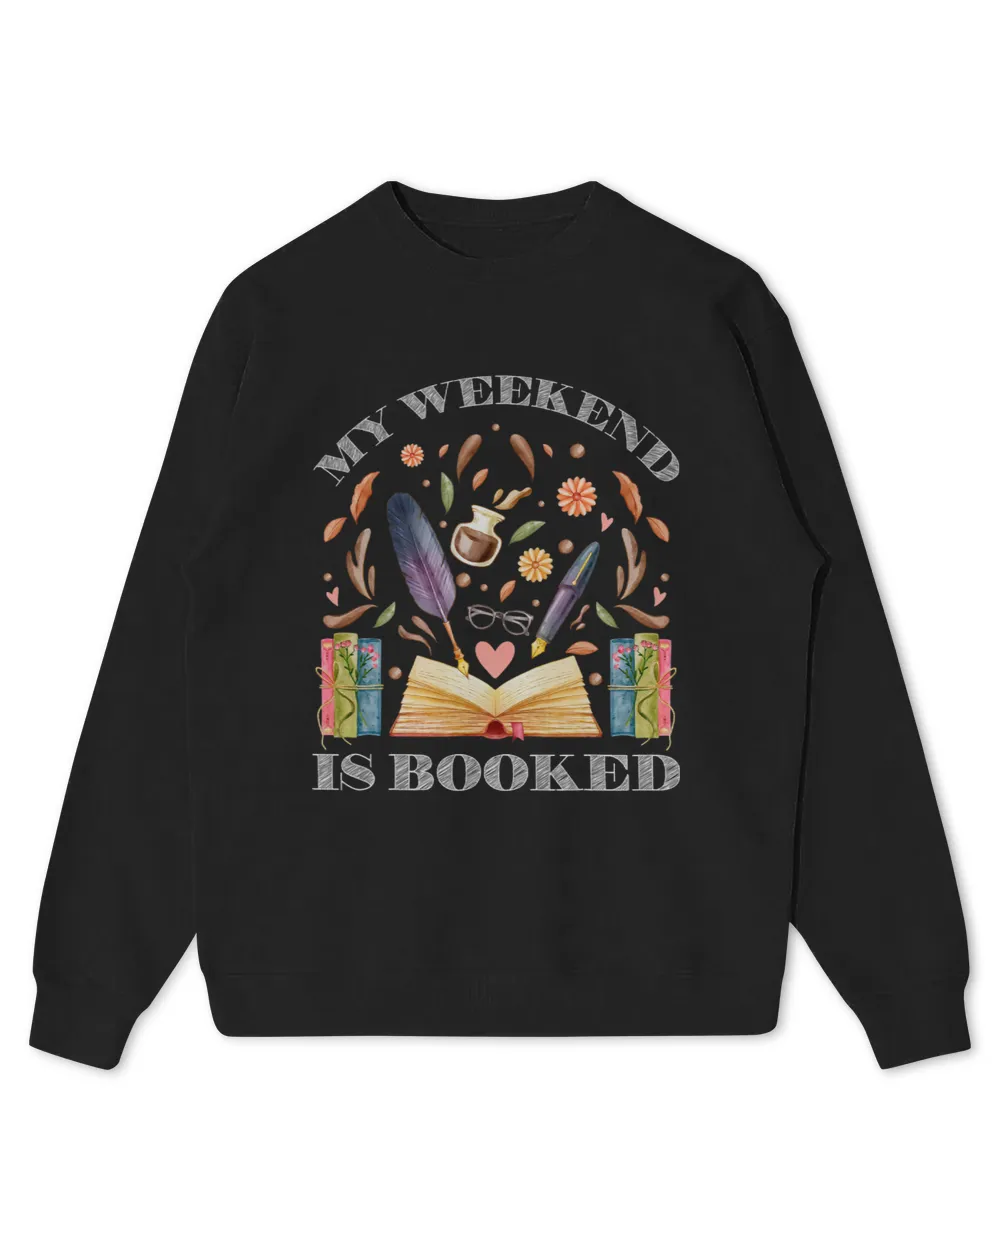 My Weekend is Booked Shirt Bookish Books Lover Bookworm